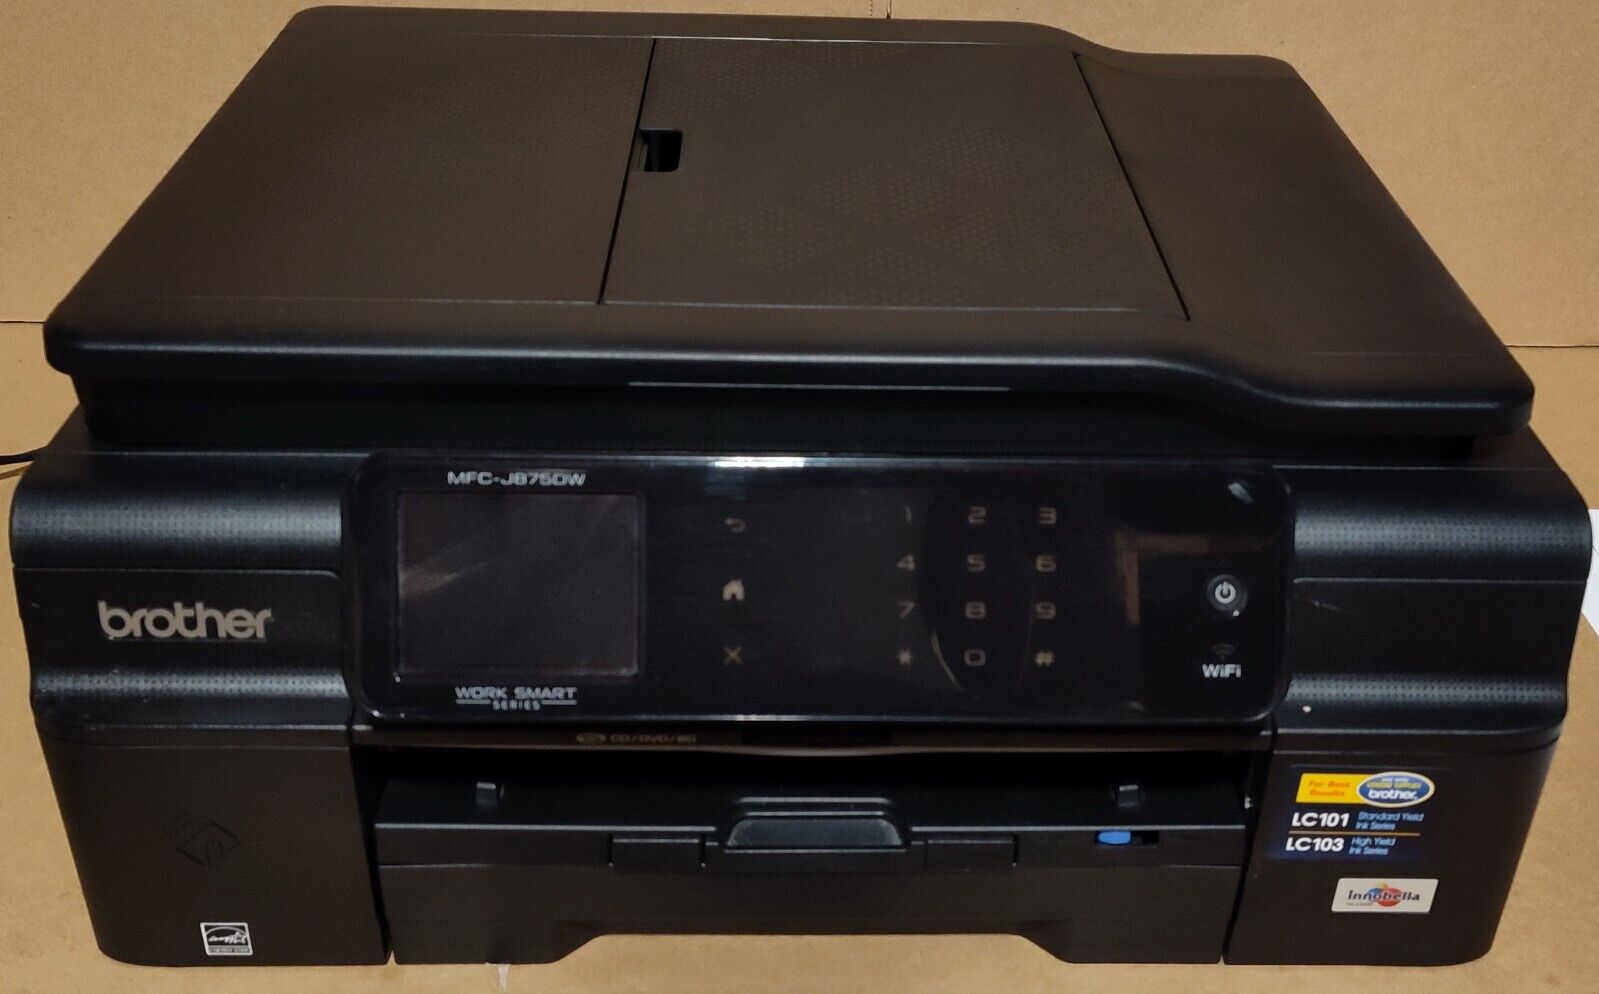 Brother Work Smart Series MFC-J875DW All-in-One Inkjet Printer Page Count - 4K